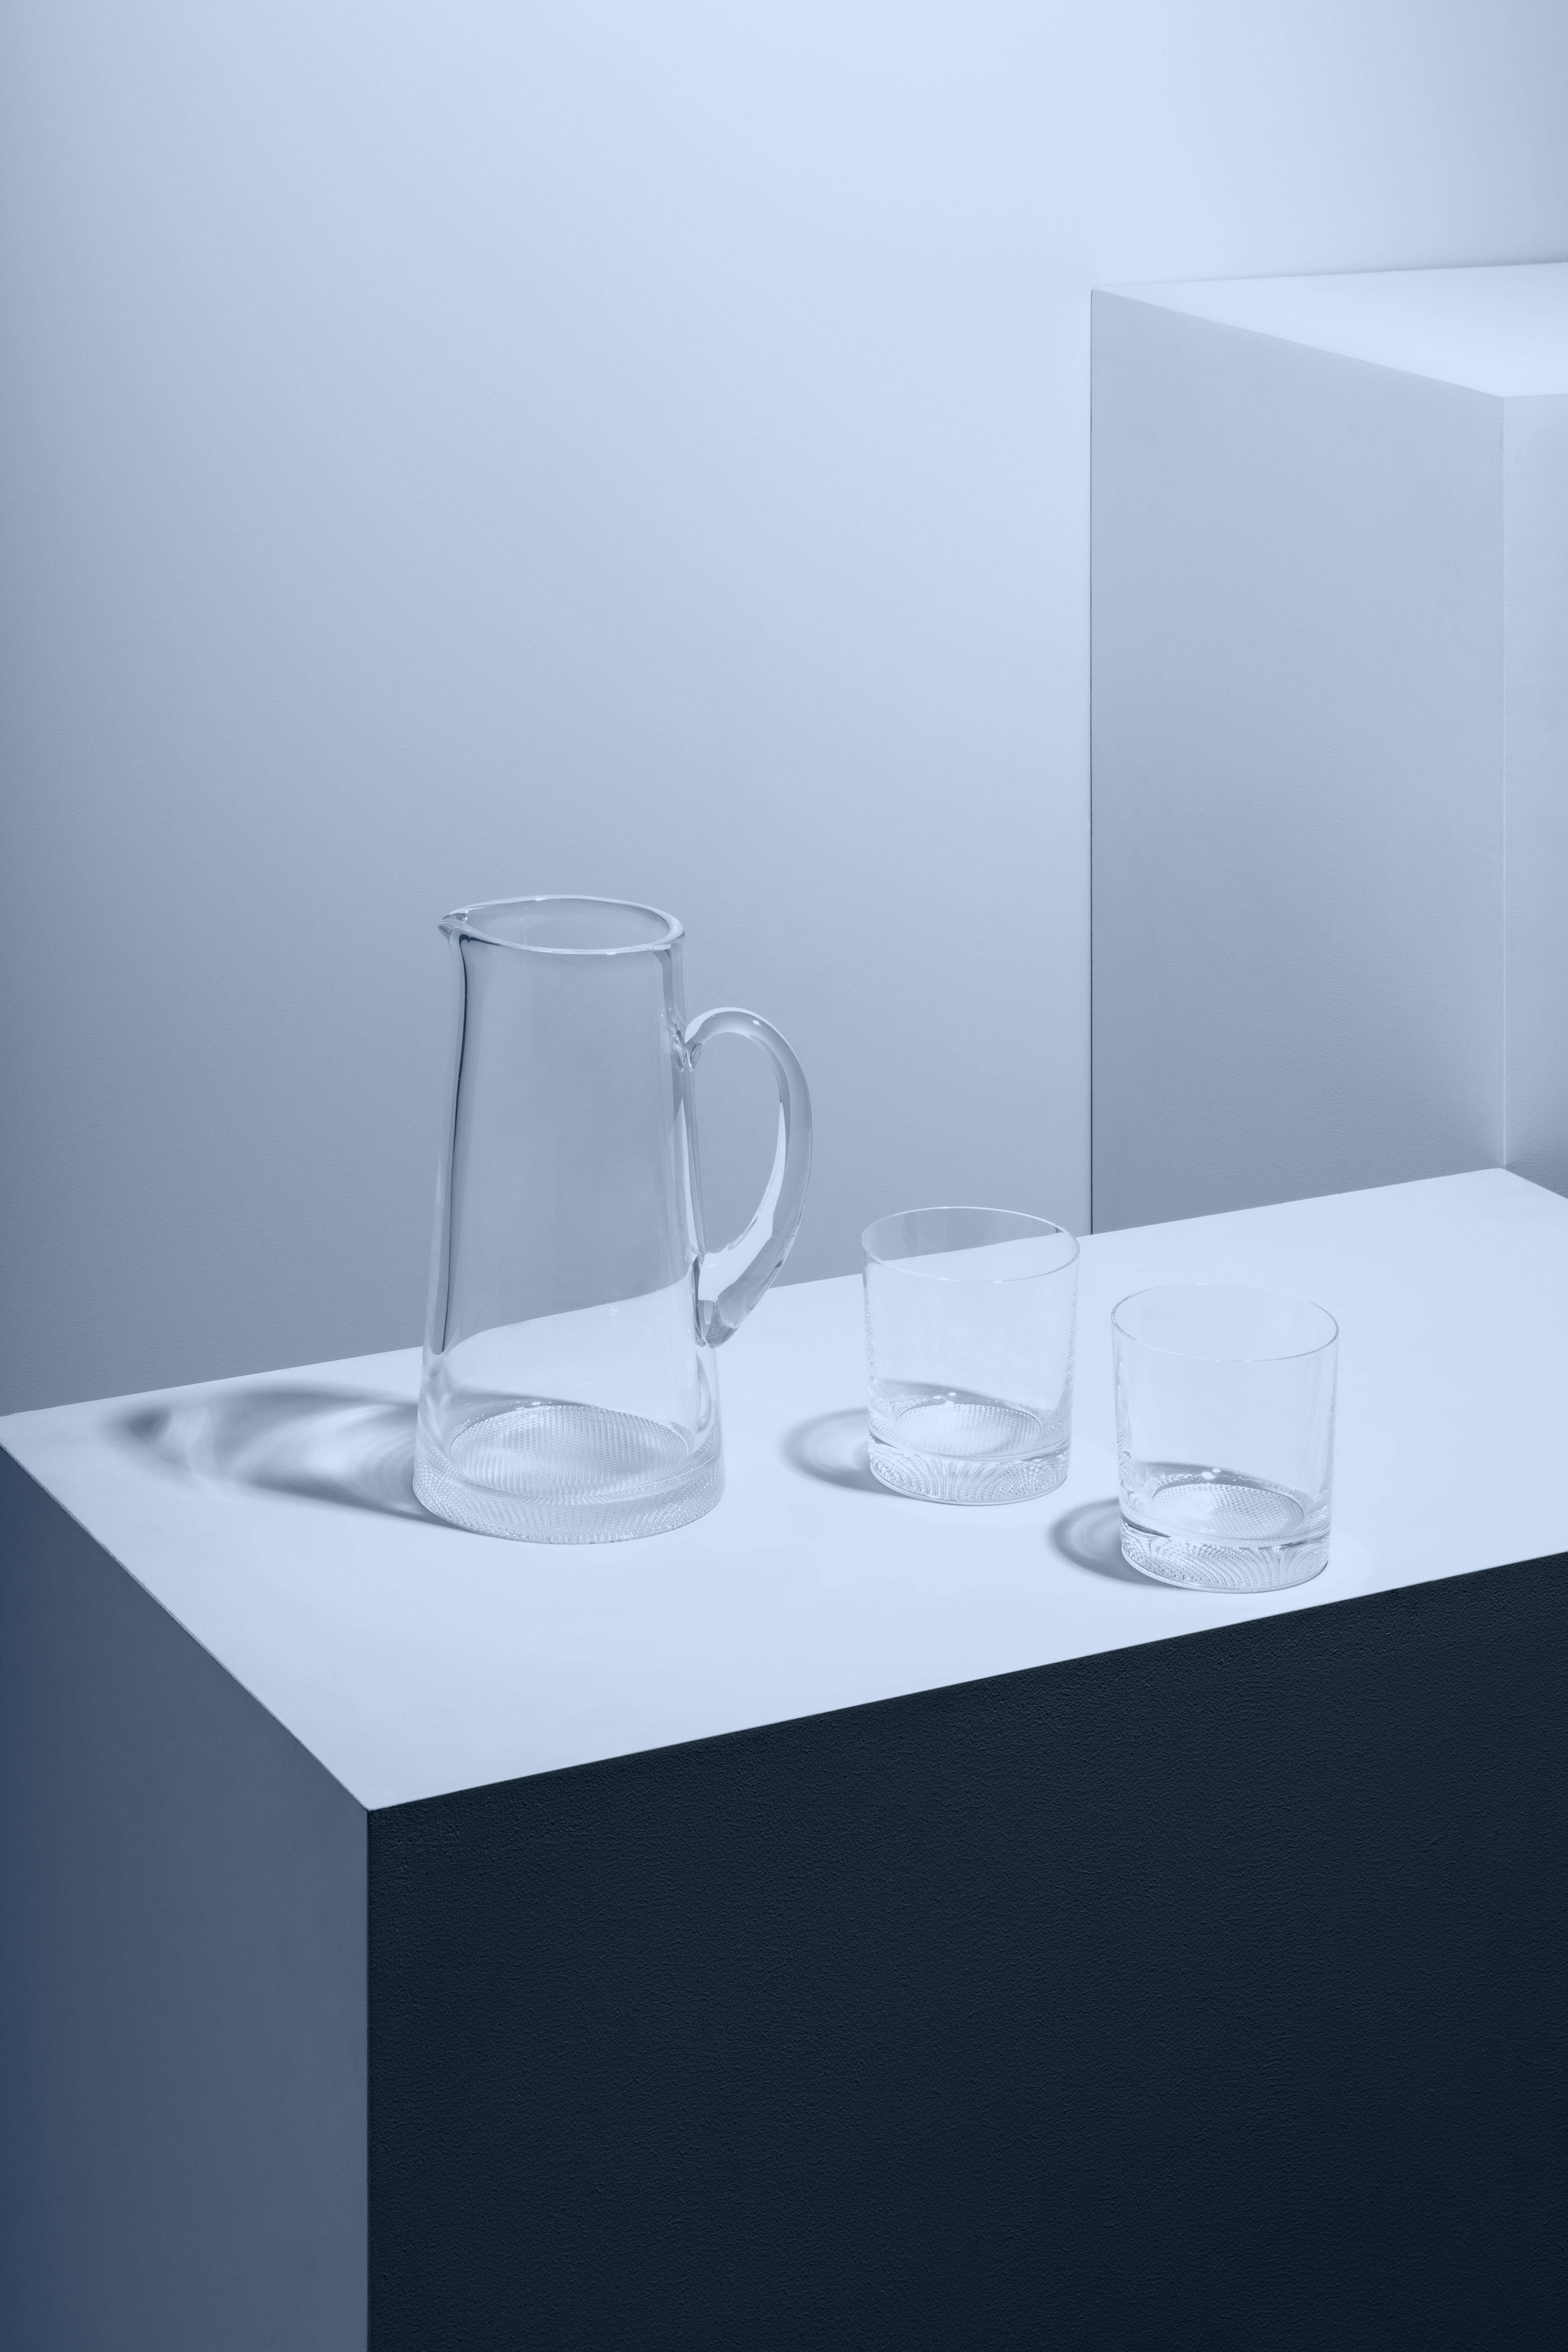 Like all the items in the Limelight collection, the DOF and pitcher in this set have the distinctive, textured base that optically reflects light. All the pieces in the collection from Kosta Boda are perfect for a beautifully set table any day of